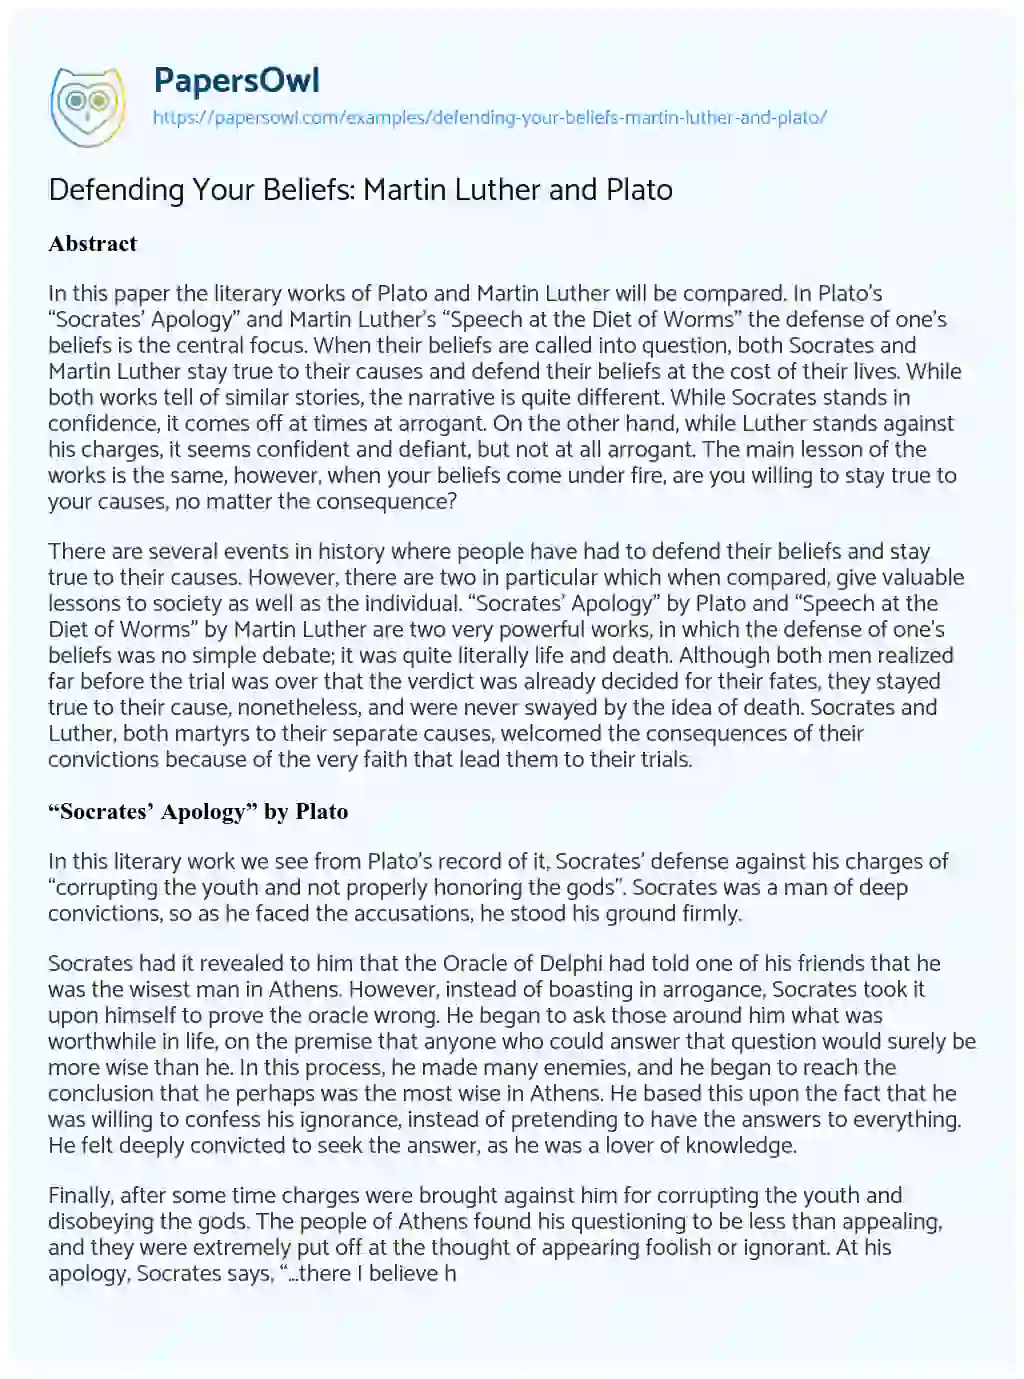 Essay on Defending your Beliefs: Martin Luther and Plato